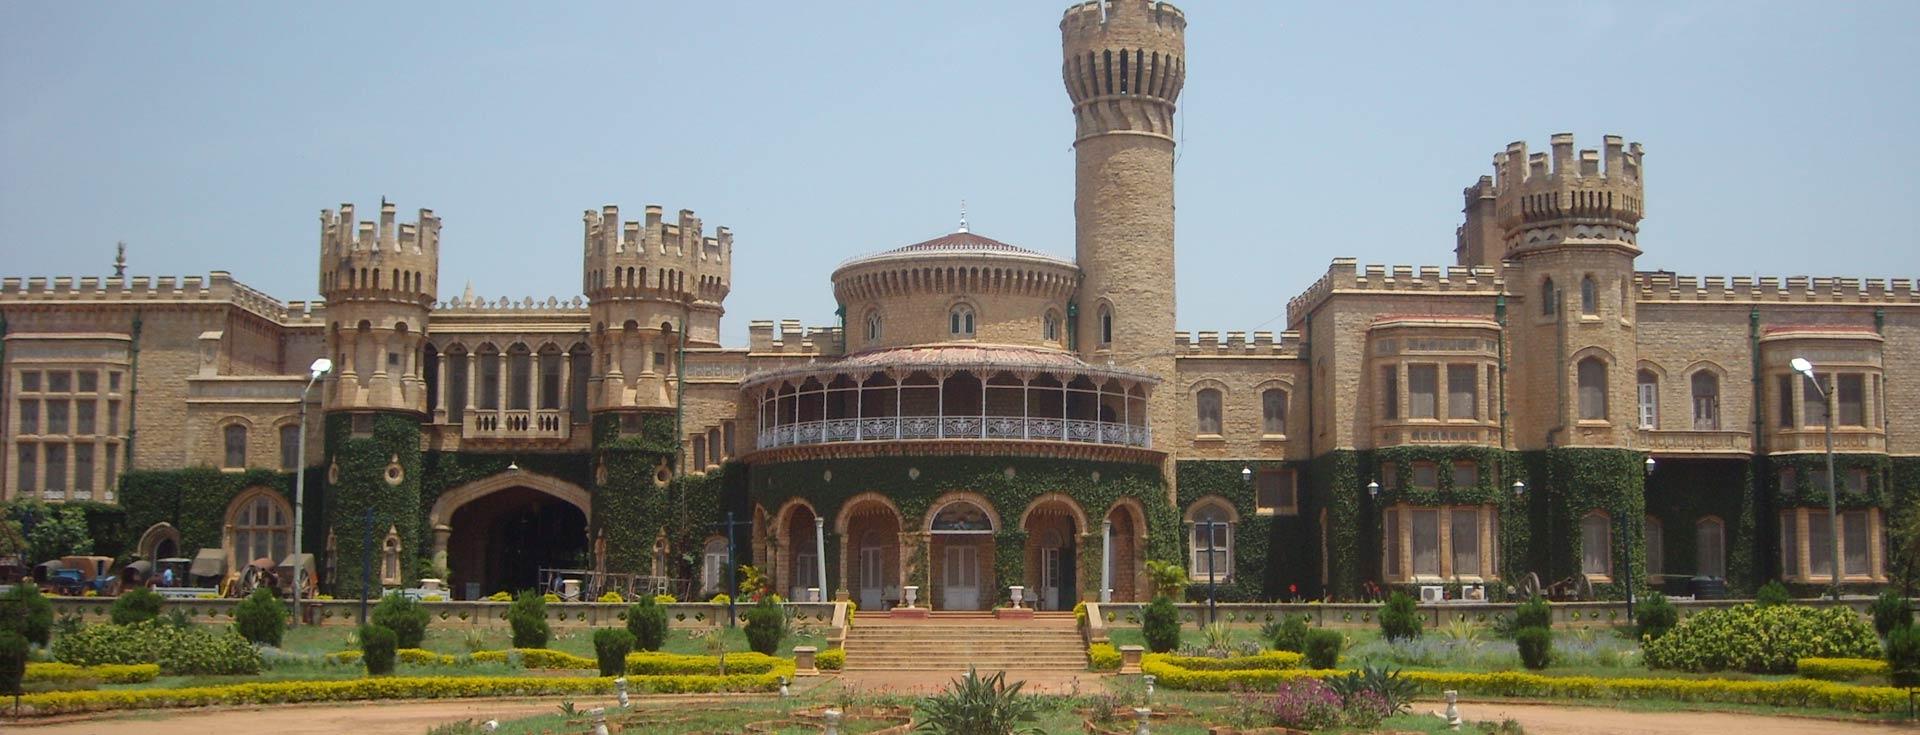 The Bangalore Palace - A place you must not miss when in the city